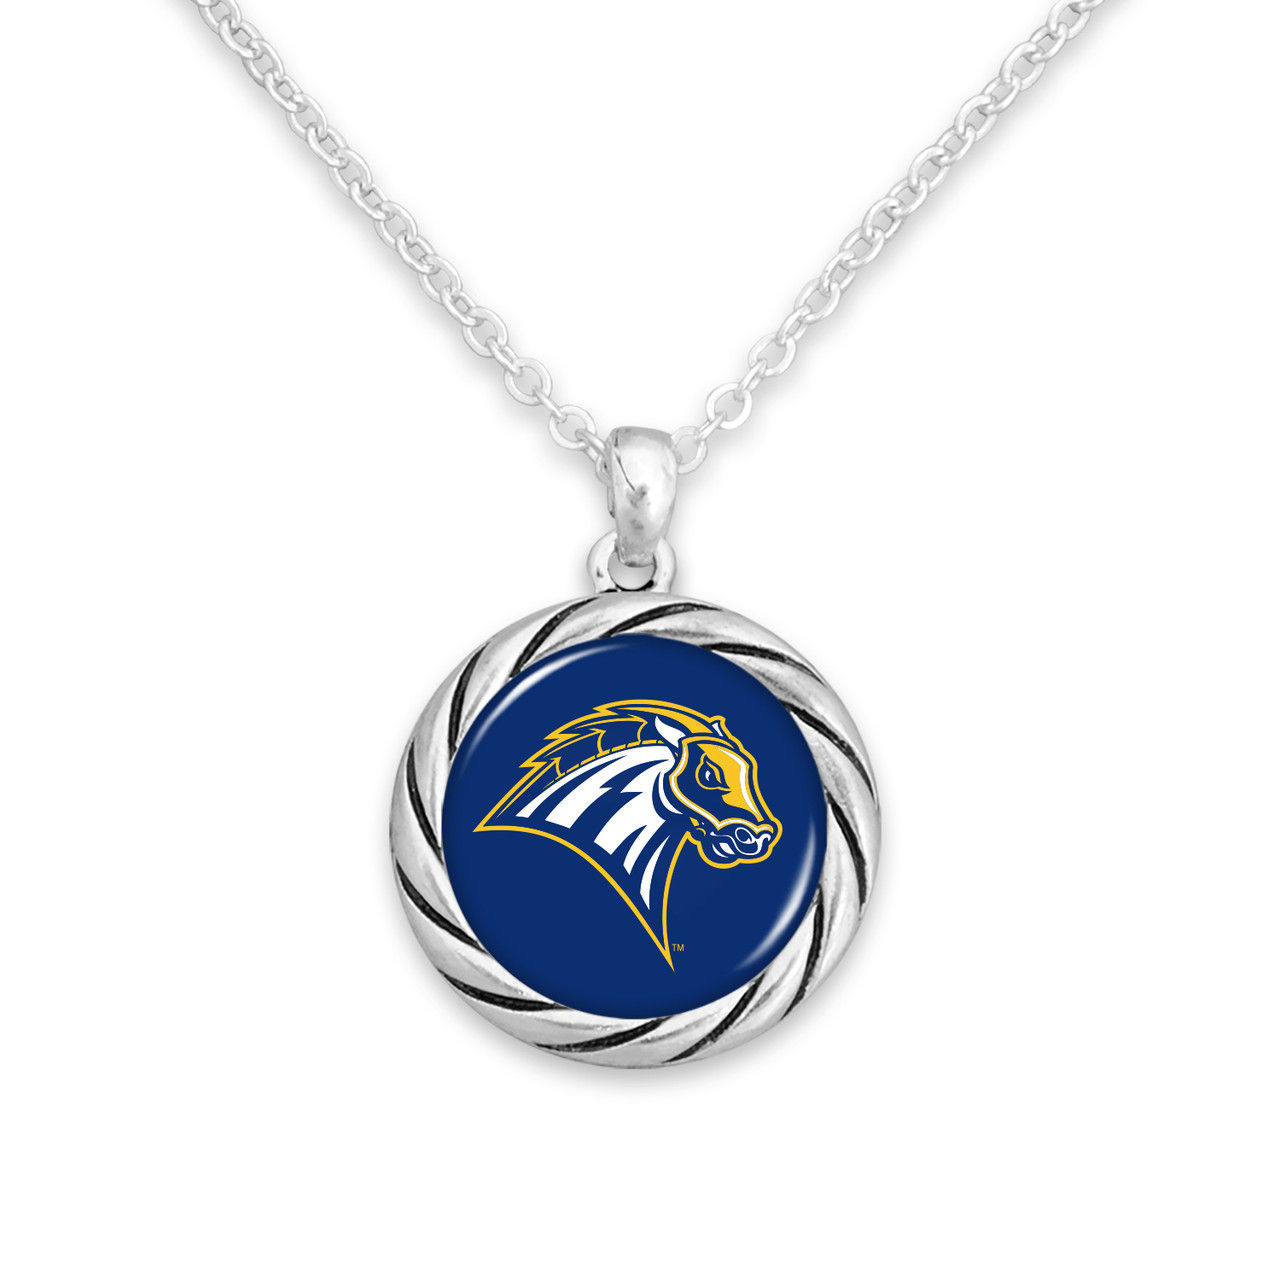 New Haven Chargers Necklace- Twisted Rope